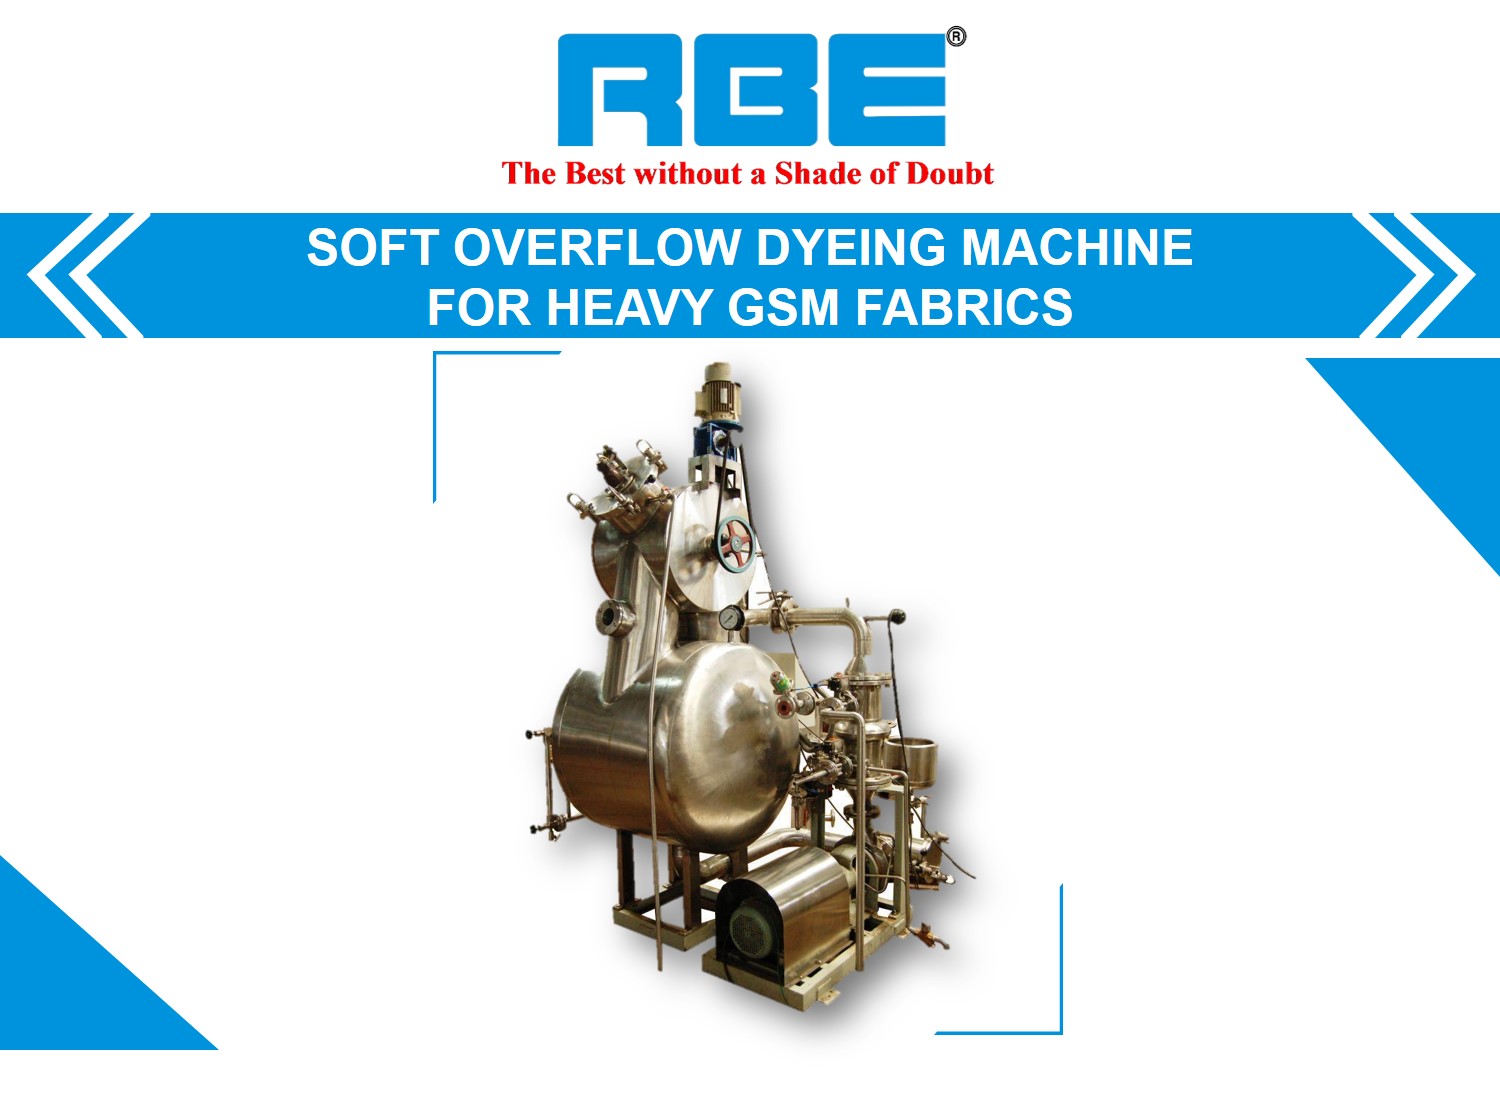 Soft Overflow Dyeing Machine for Heavy GSM Fabrics 